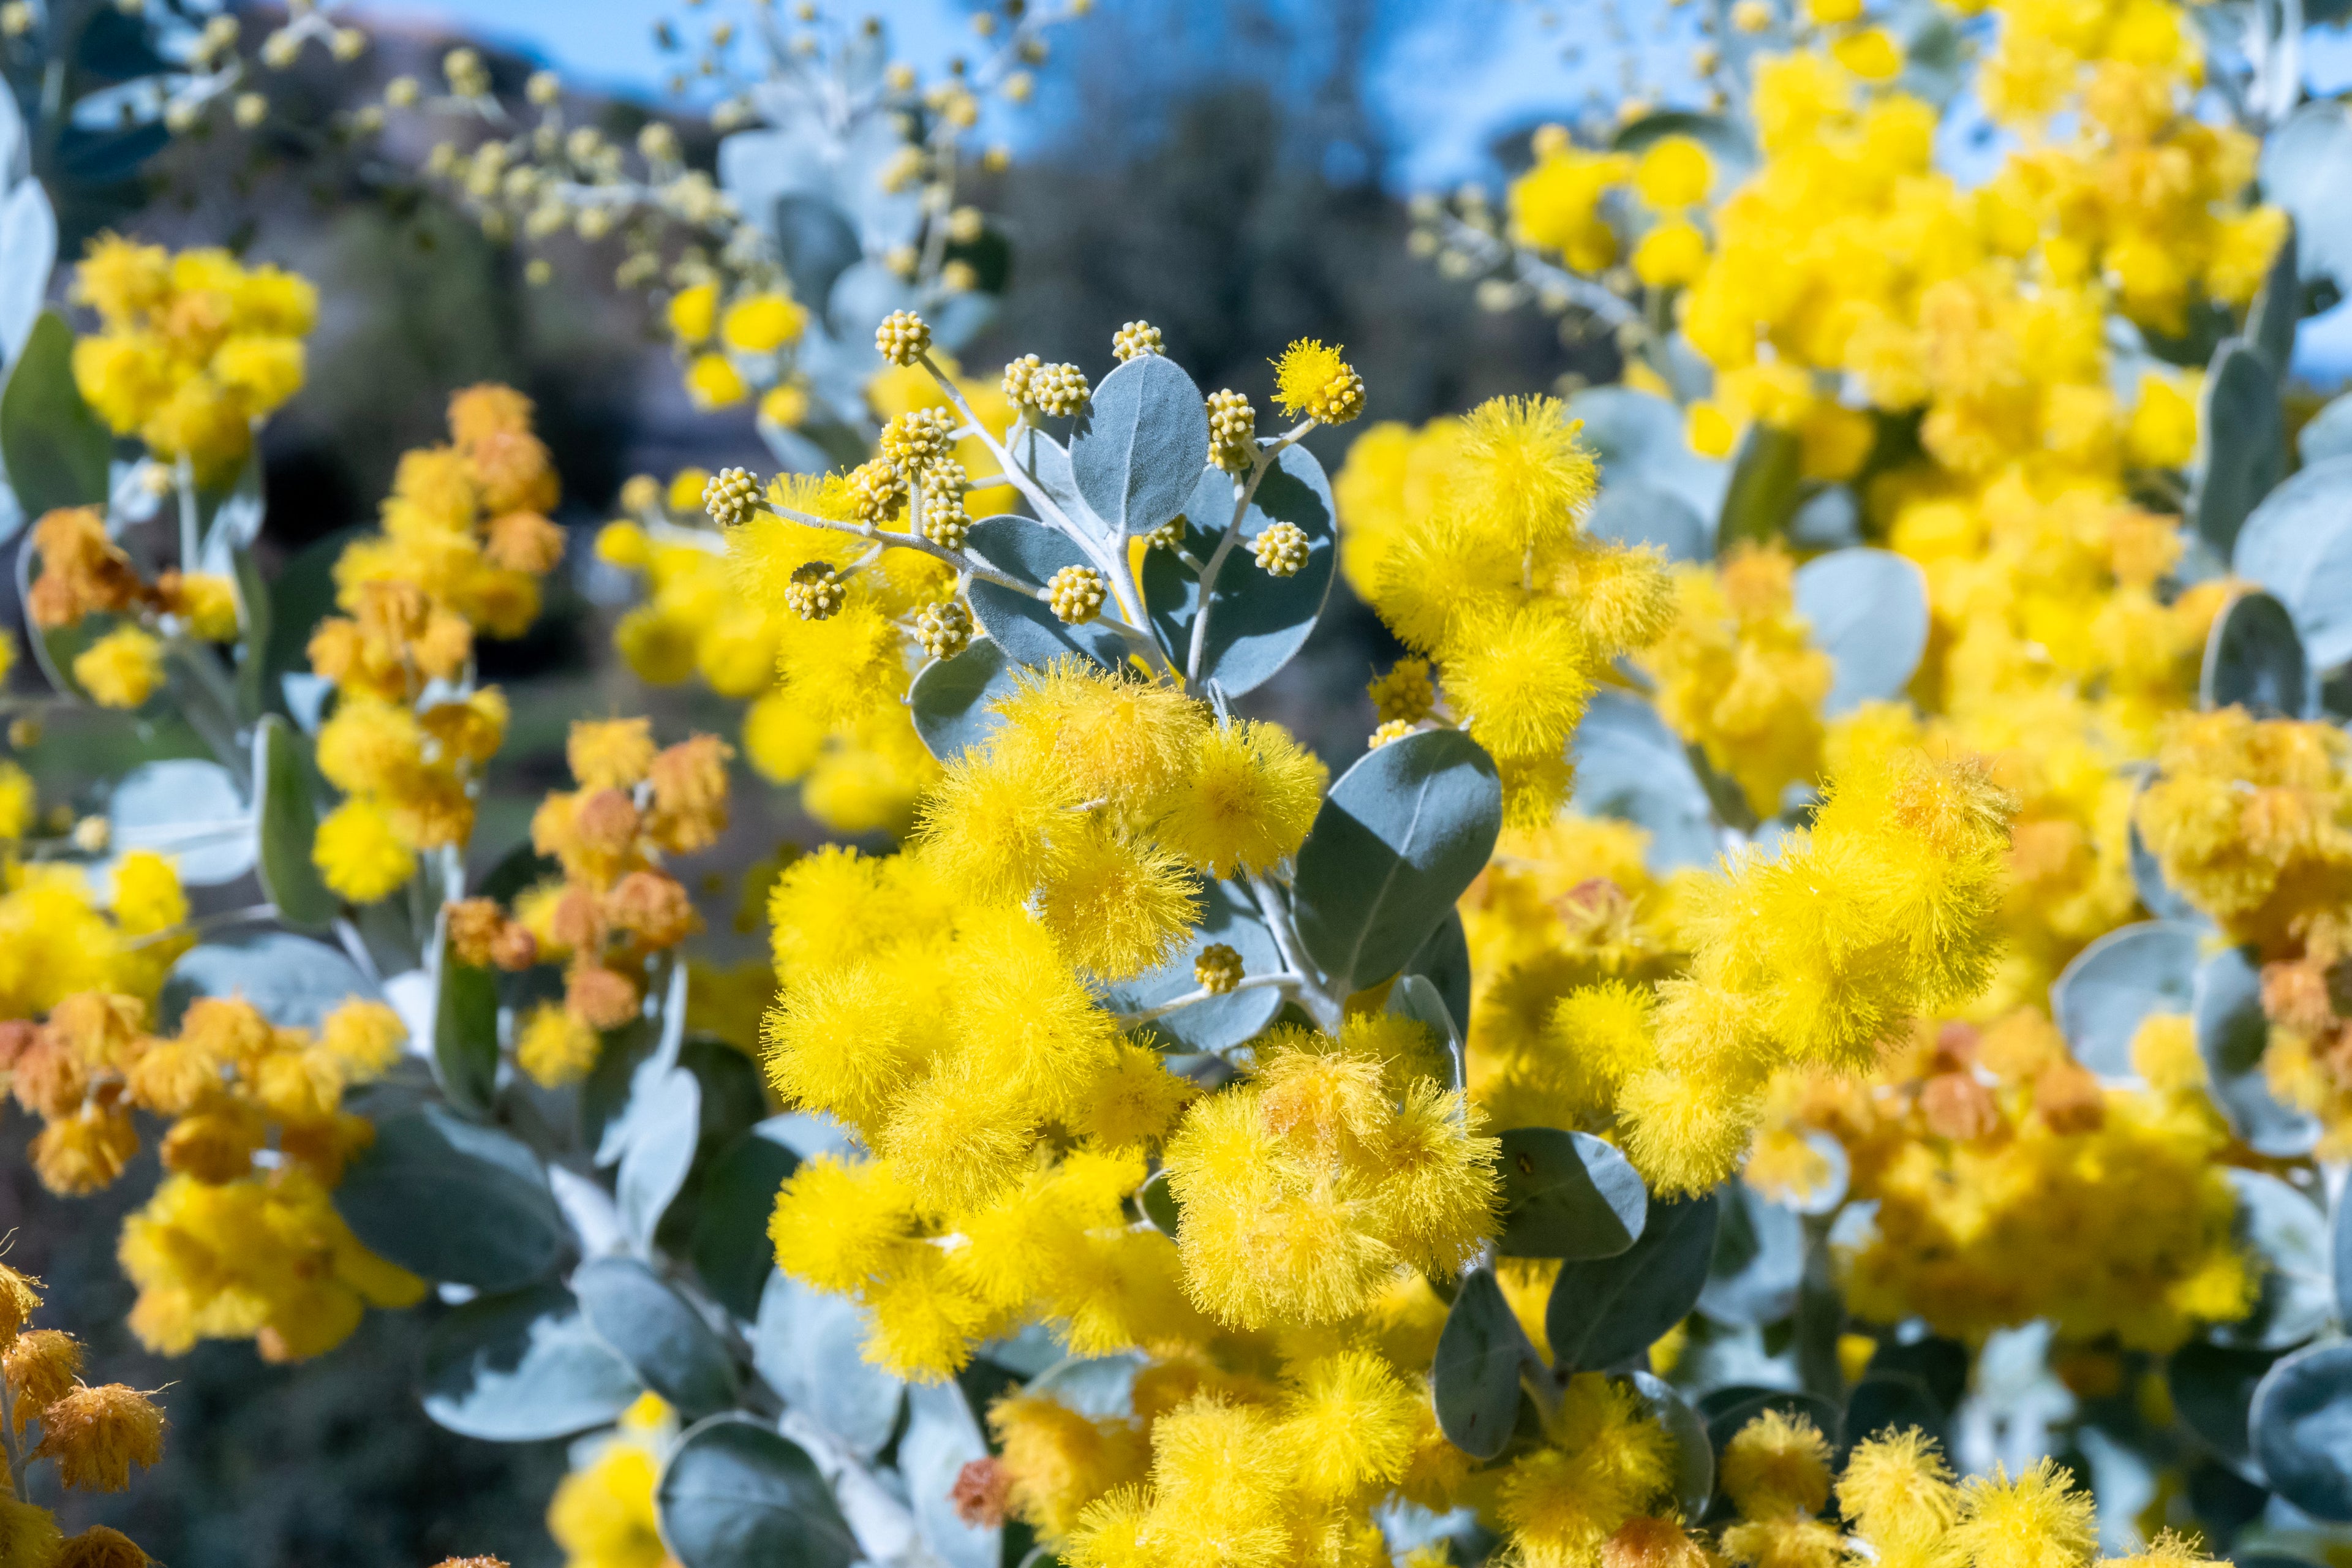 Pearl Acacia announces it bloom with fluffy yellow pom poms, although we typically remove them for shipping, as the primary trait that our clients love about this variety is the durable, yet elegant blue, green, and silver foliage